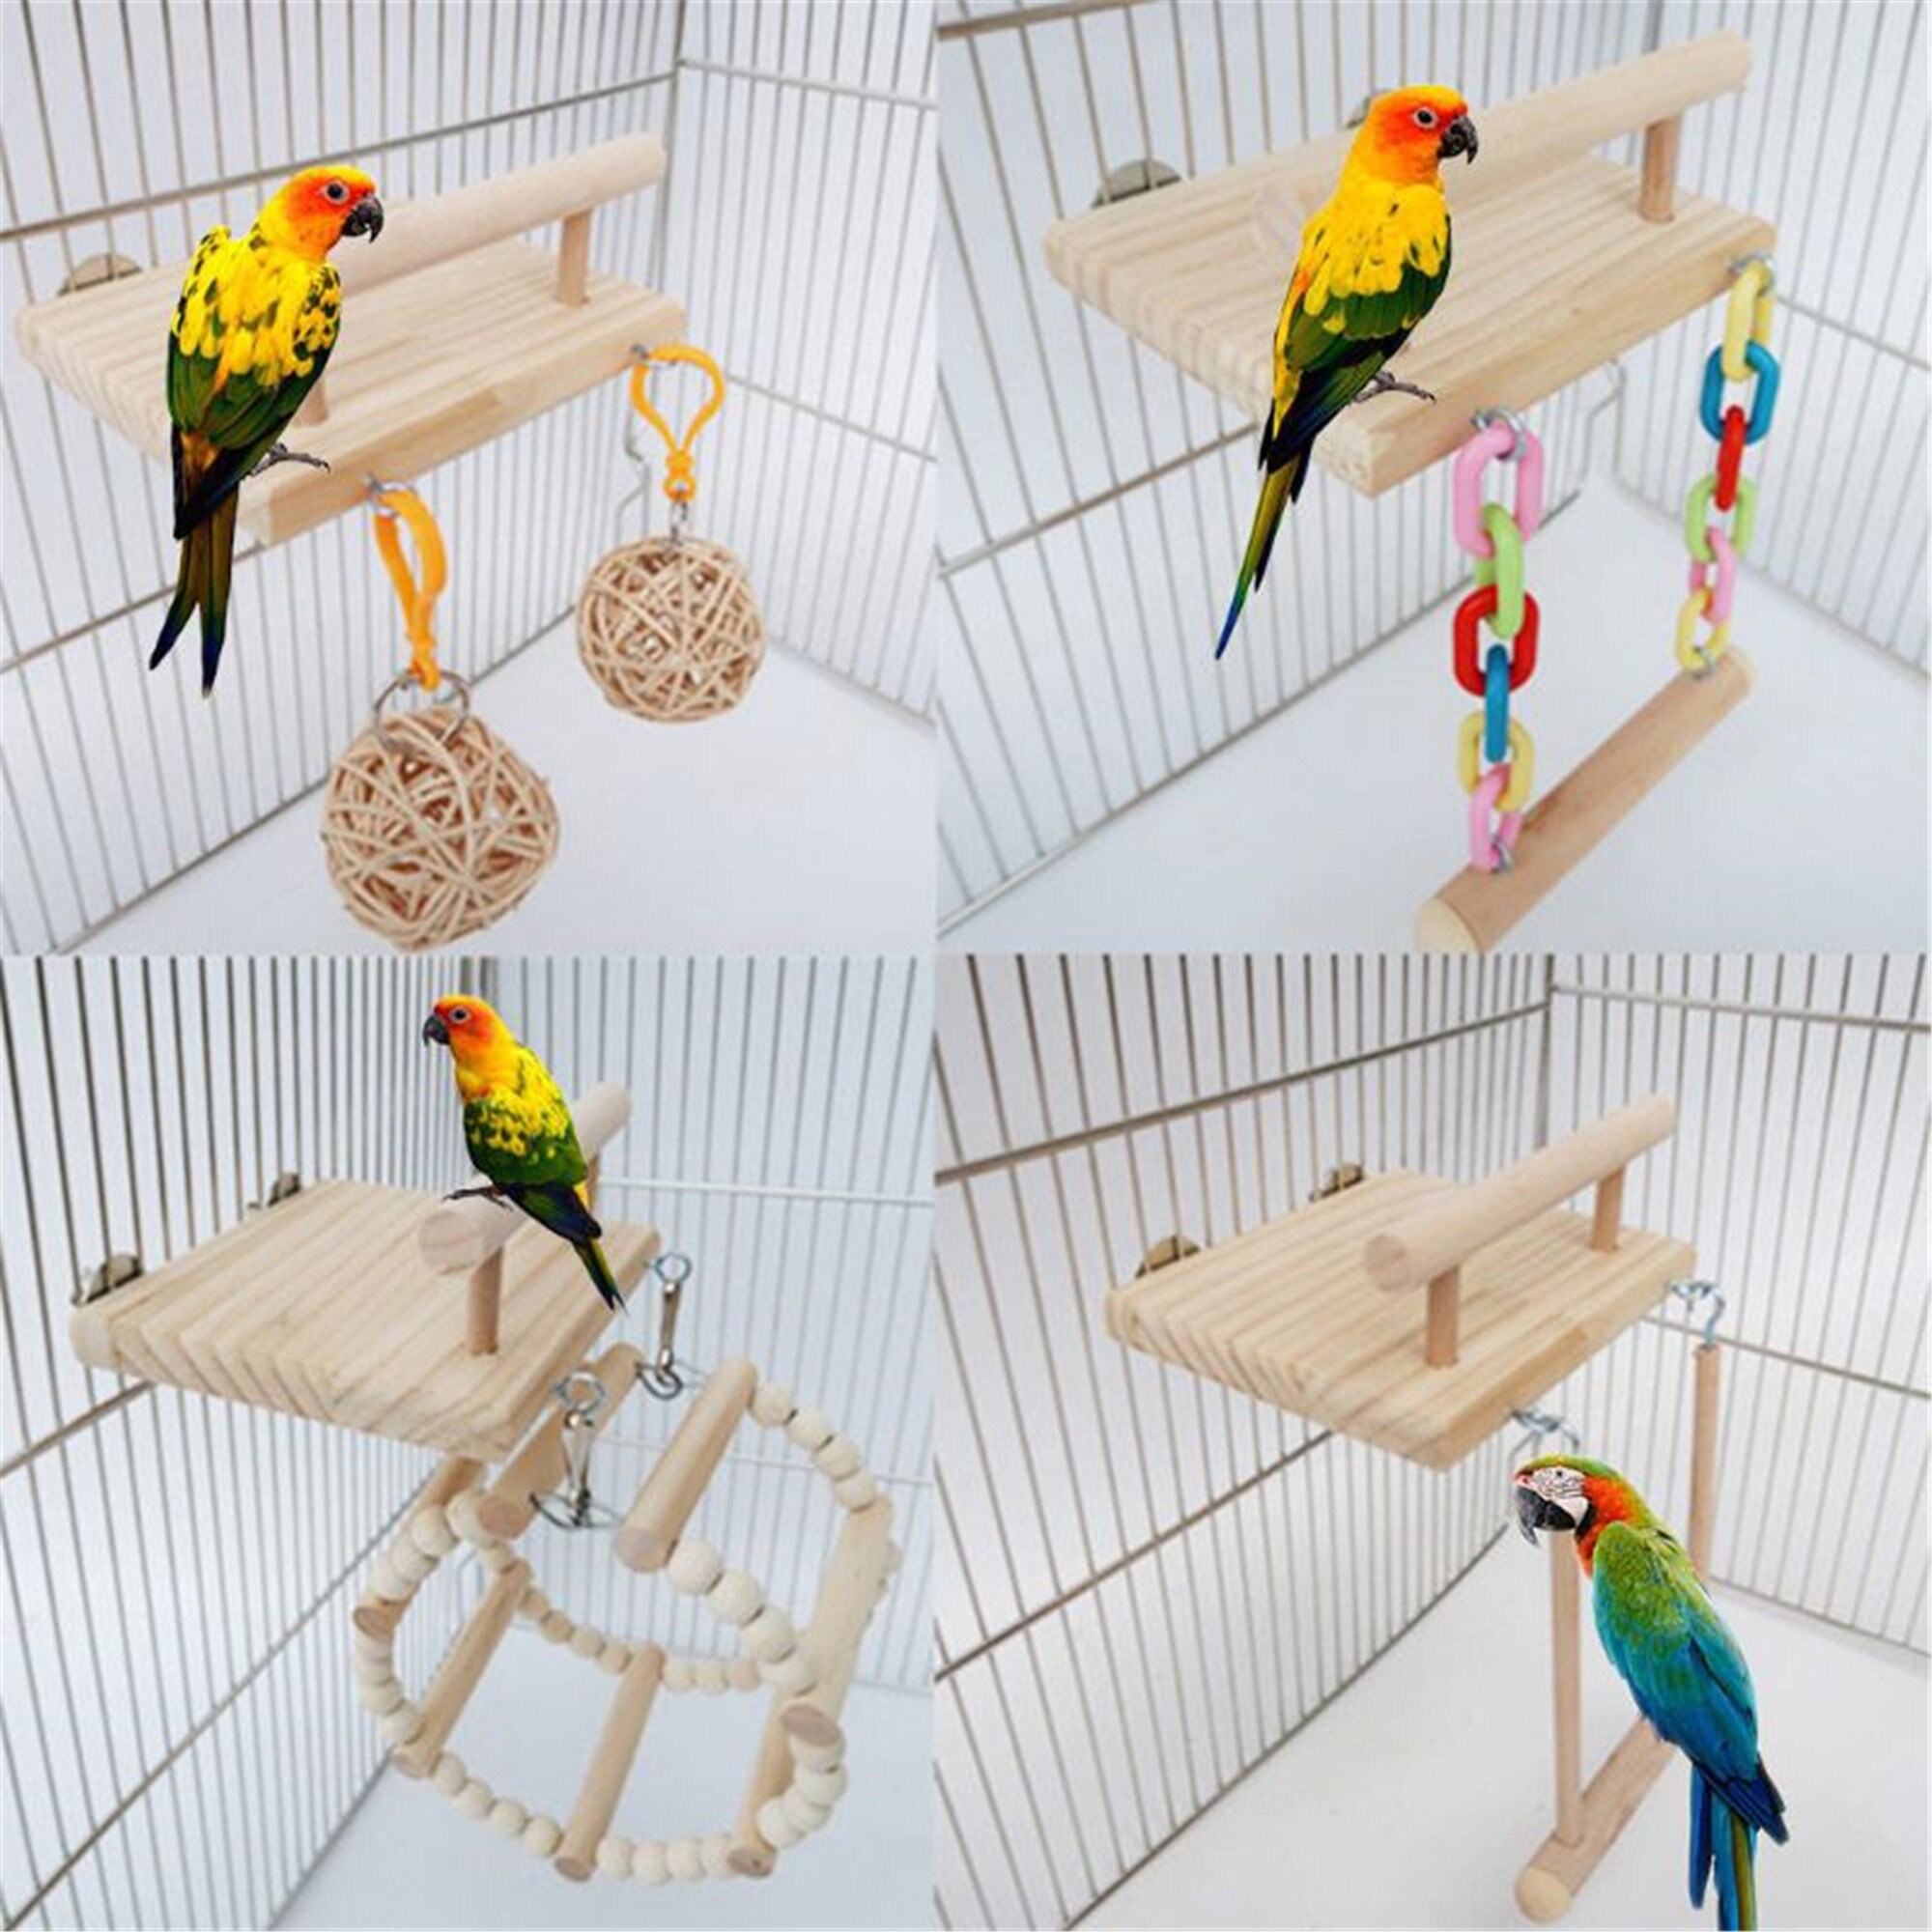 BWOGUE Colorful Bird Perch Stand Platform,Natural Wood Paw Grinding Bird Cage Perch for Parrot Parakeet Hamster Gerbil Cages Toy 